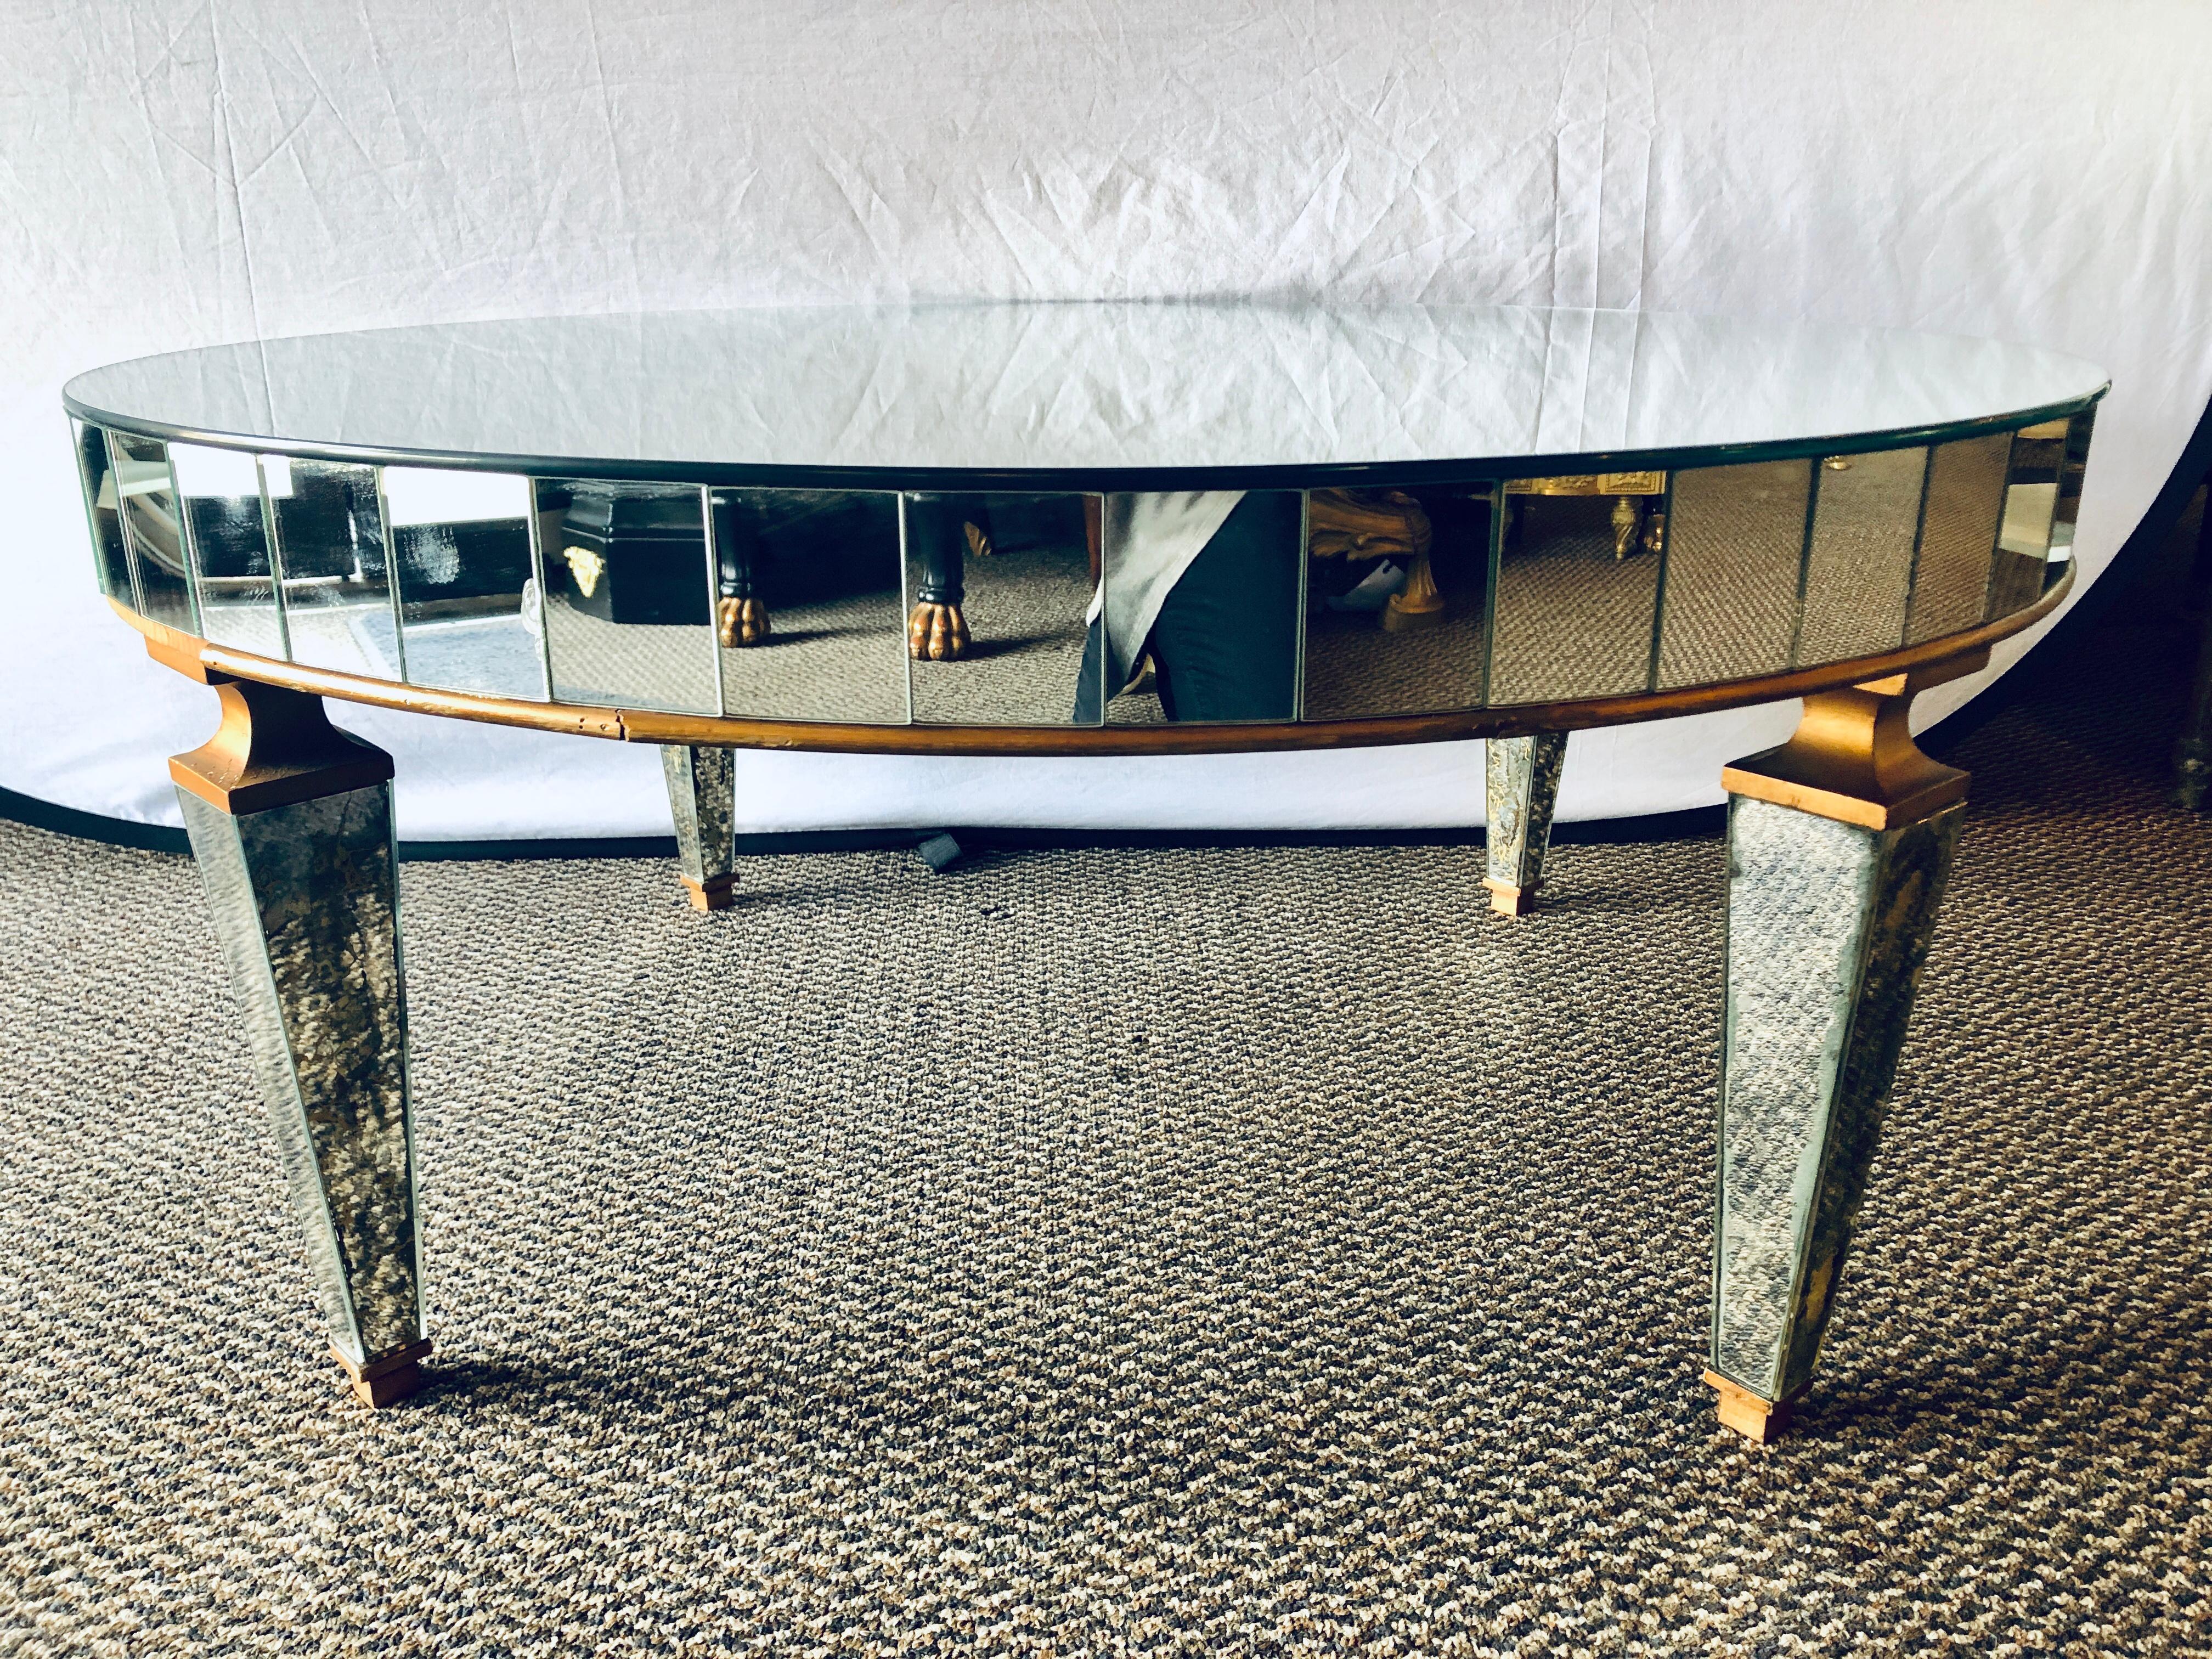 Mirrored circular Art Deco style coffee or low table in a distressed look.